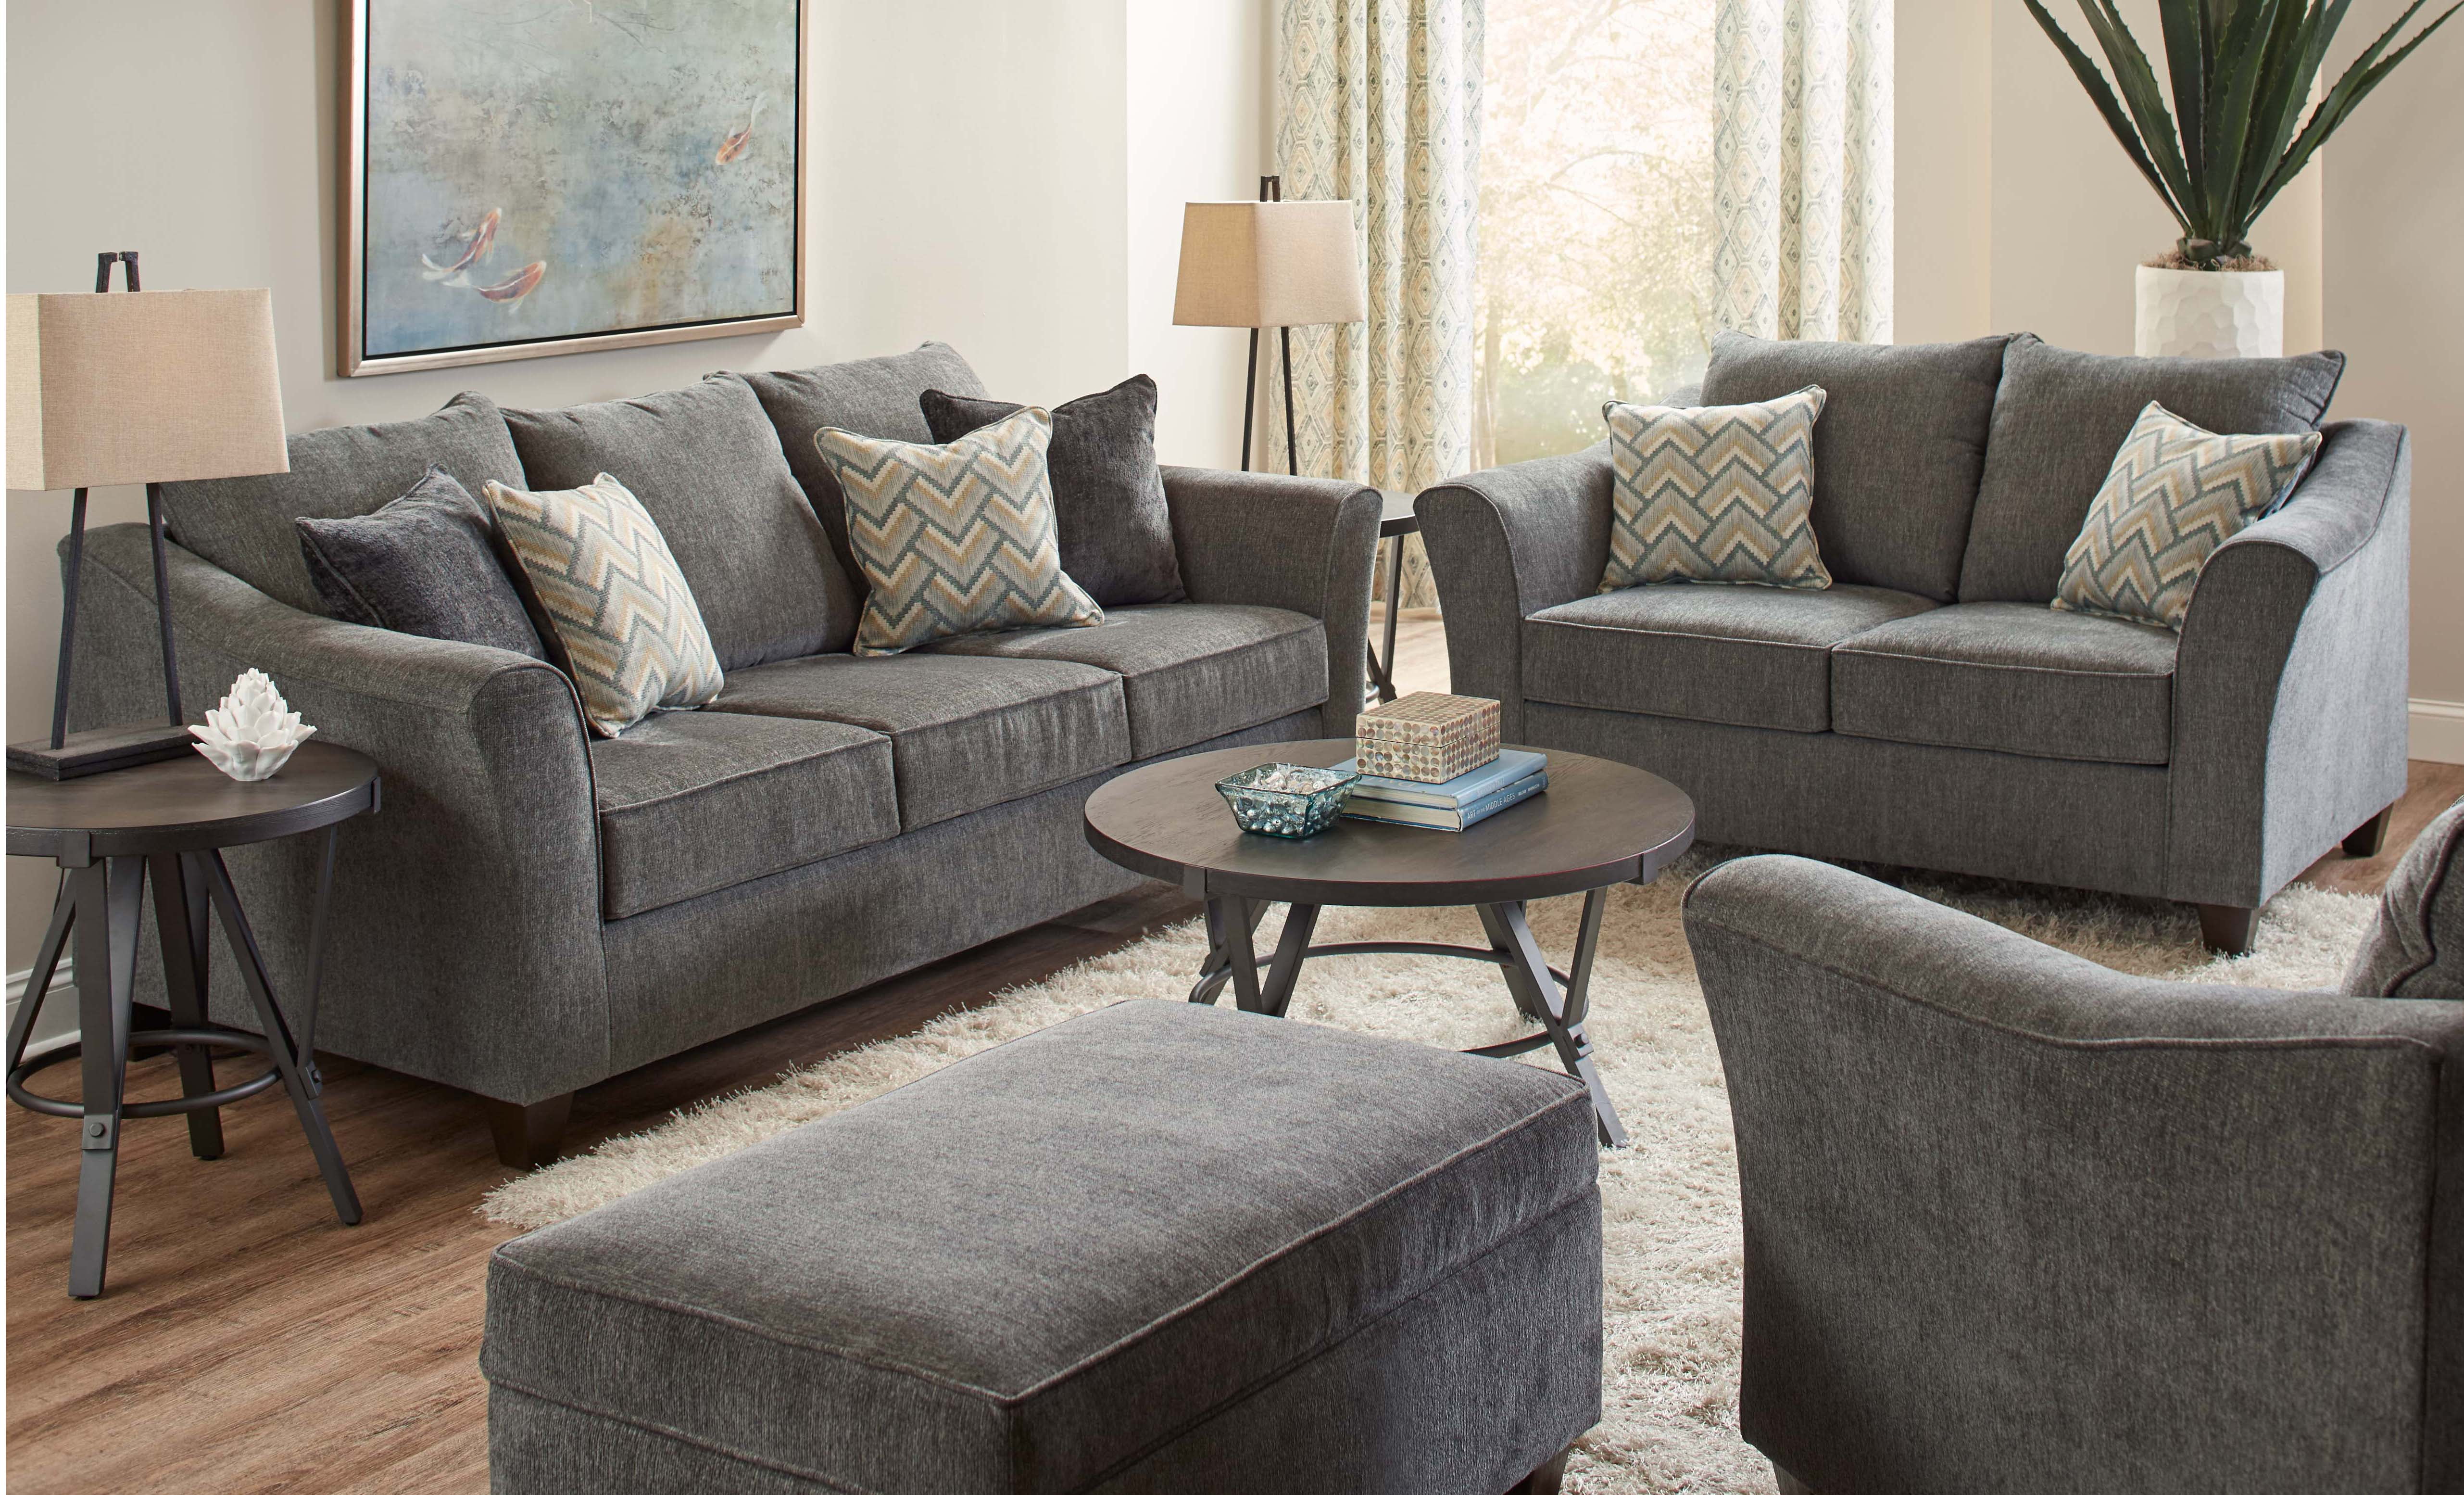 Gray Shelter Back Couch with Black and White Pillow - Transitional